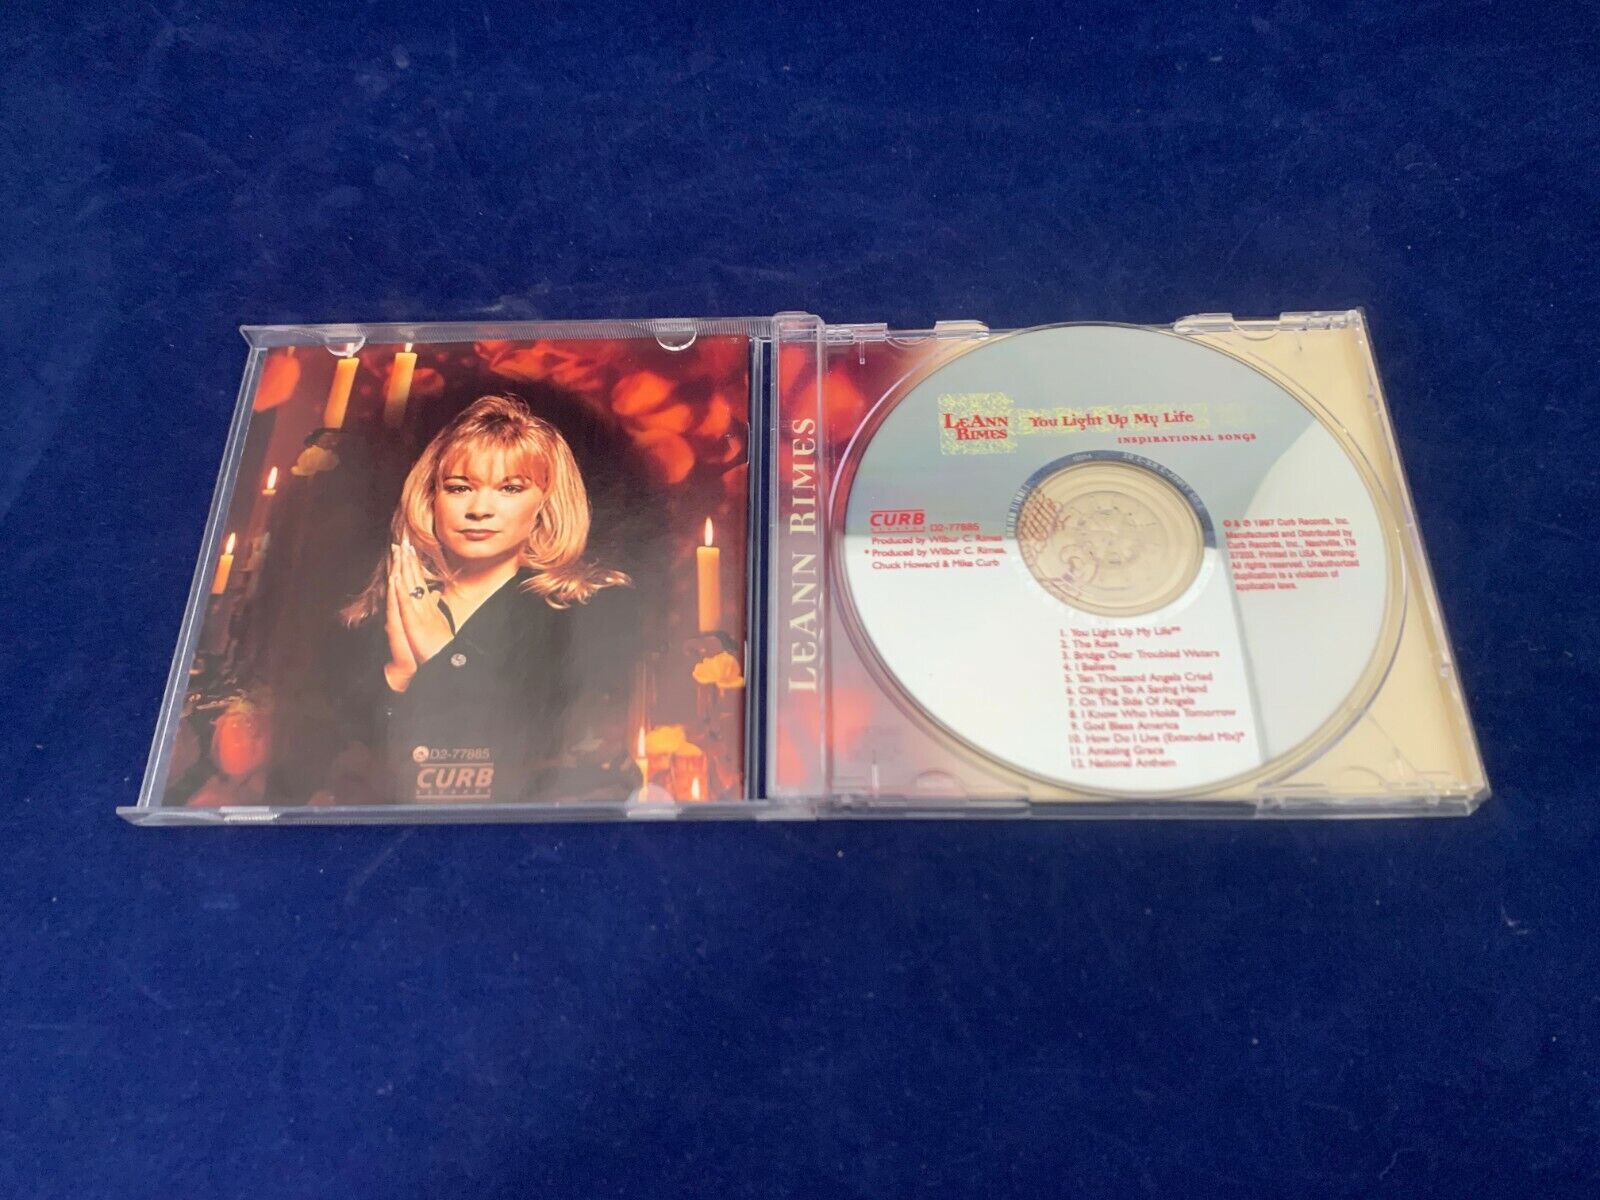 Leann Rimes You light up my life CD Album Used with Free Shipping Curb Records